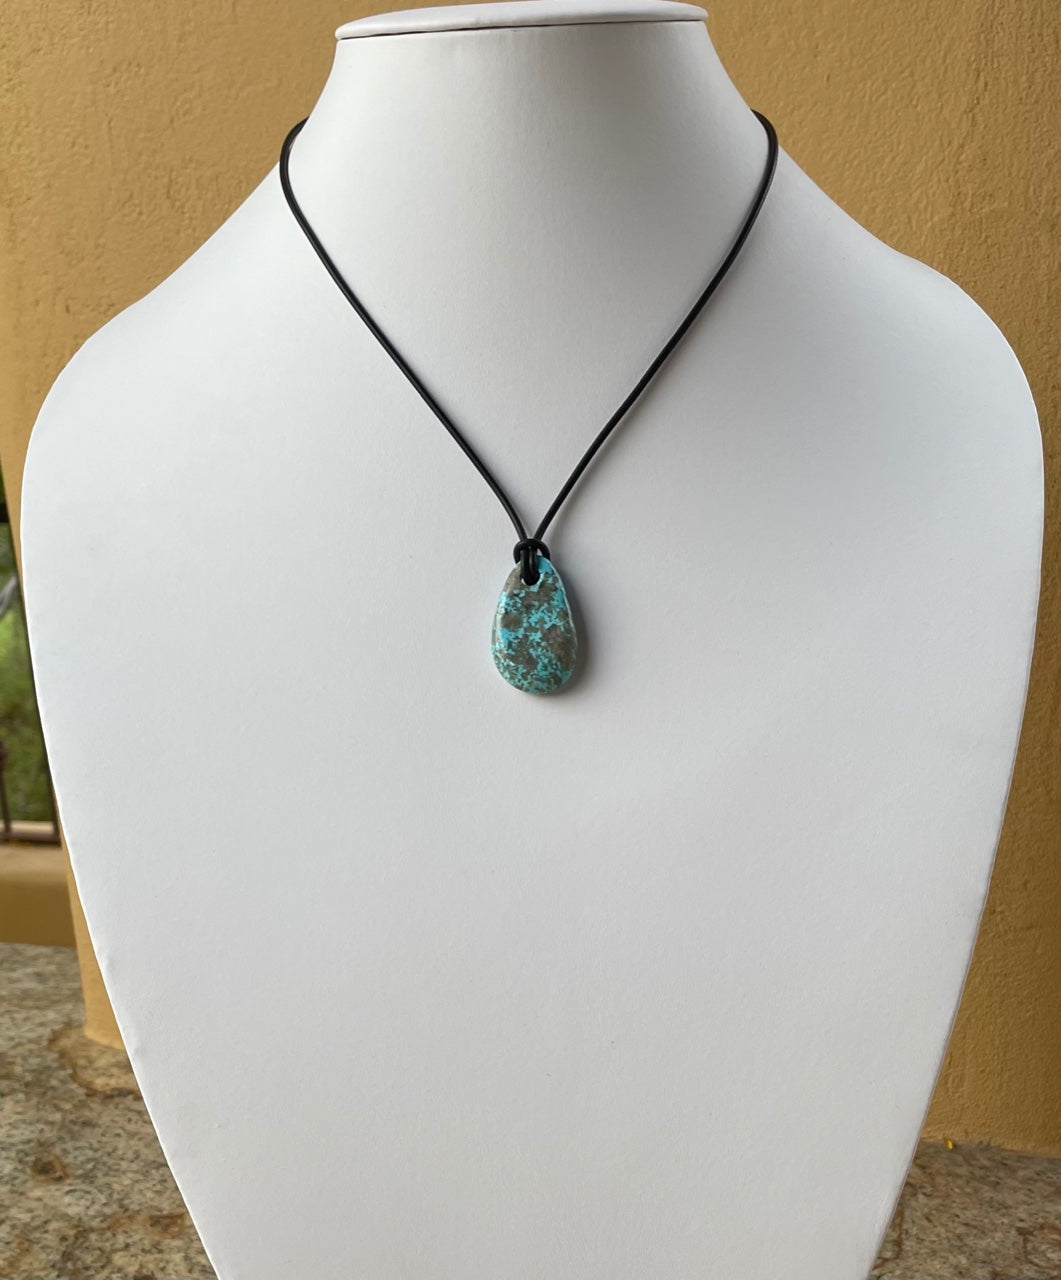 Necklace - Black rubber cord necklace with Arizona Turquoise pendant